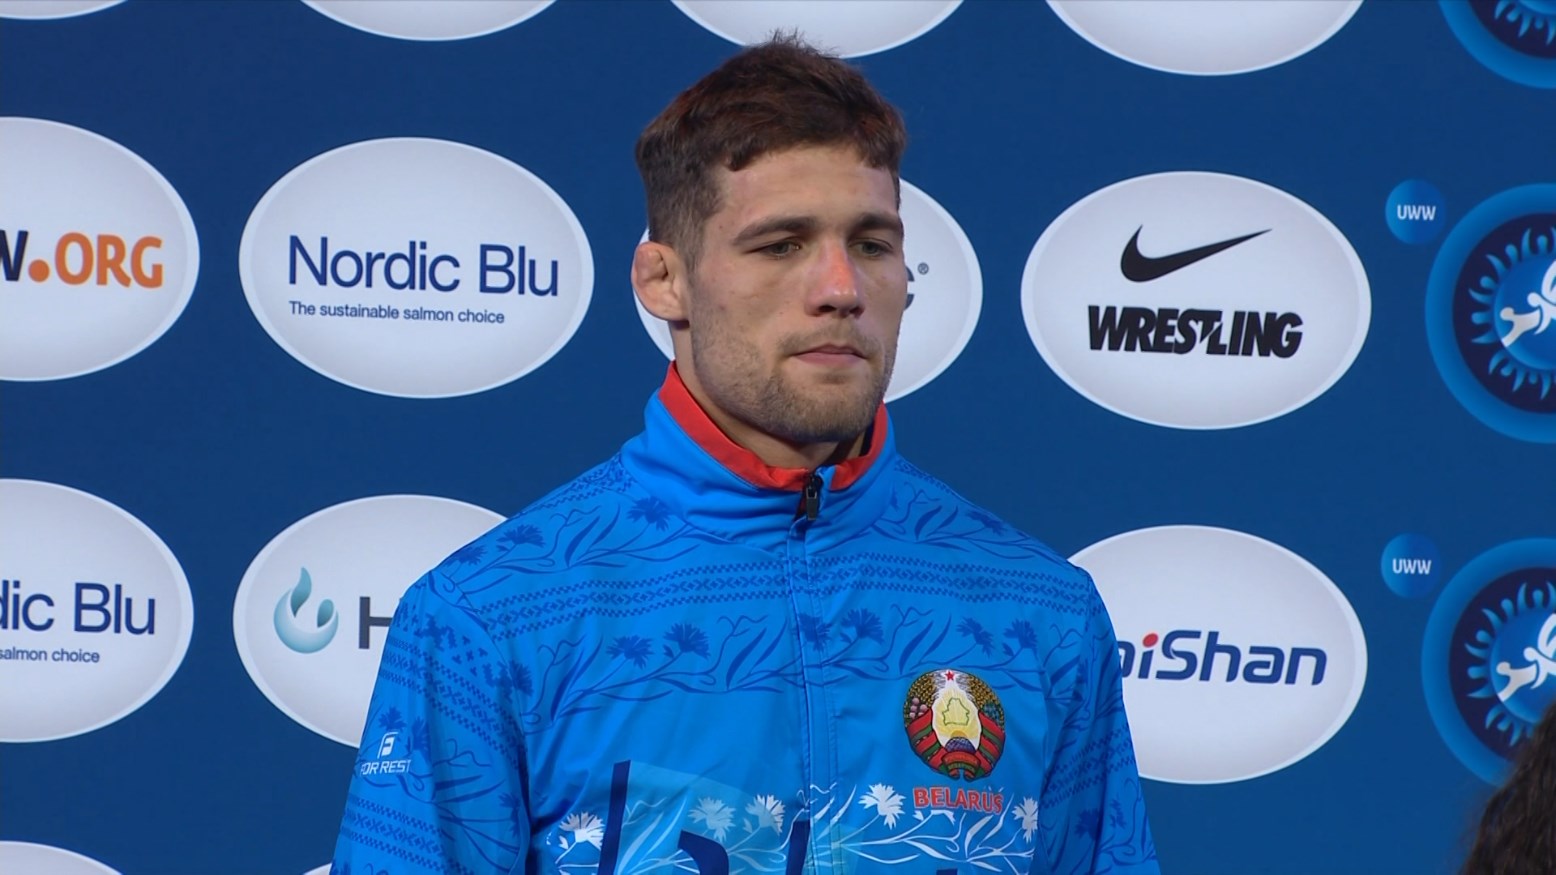 Belarusian Kirill Maskevich - silver medalist of the Greco-Roman wrestling World Cup 